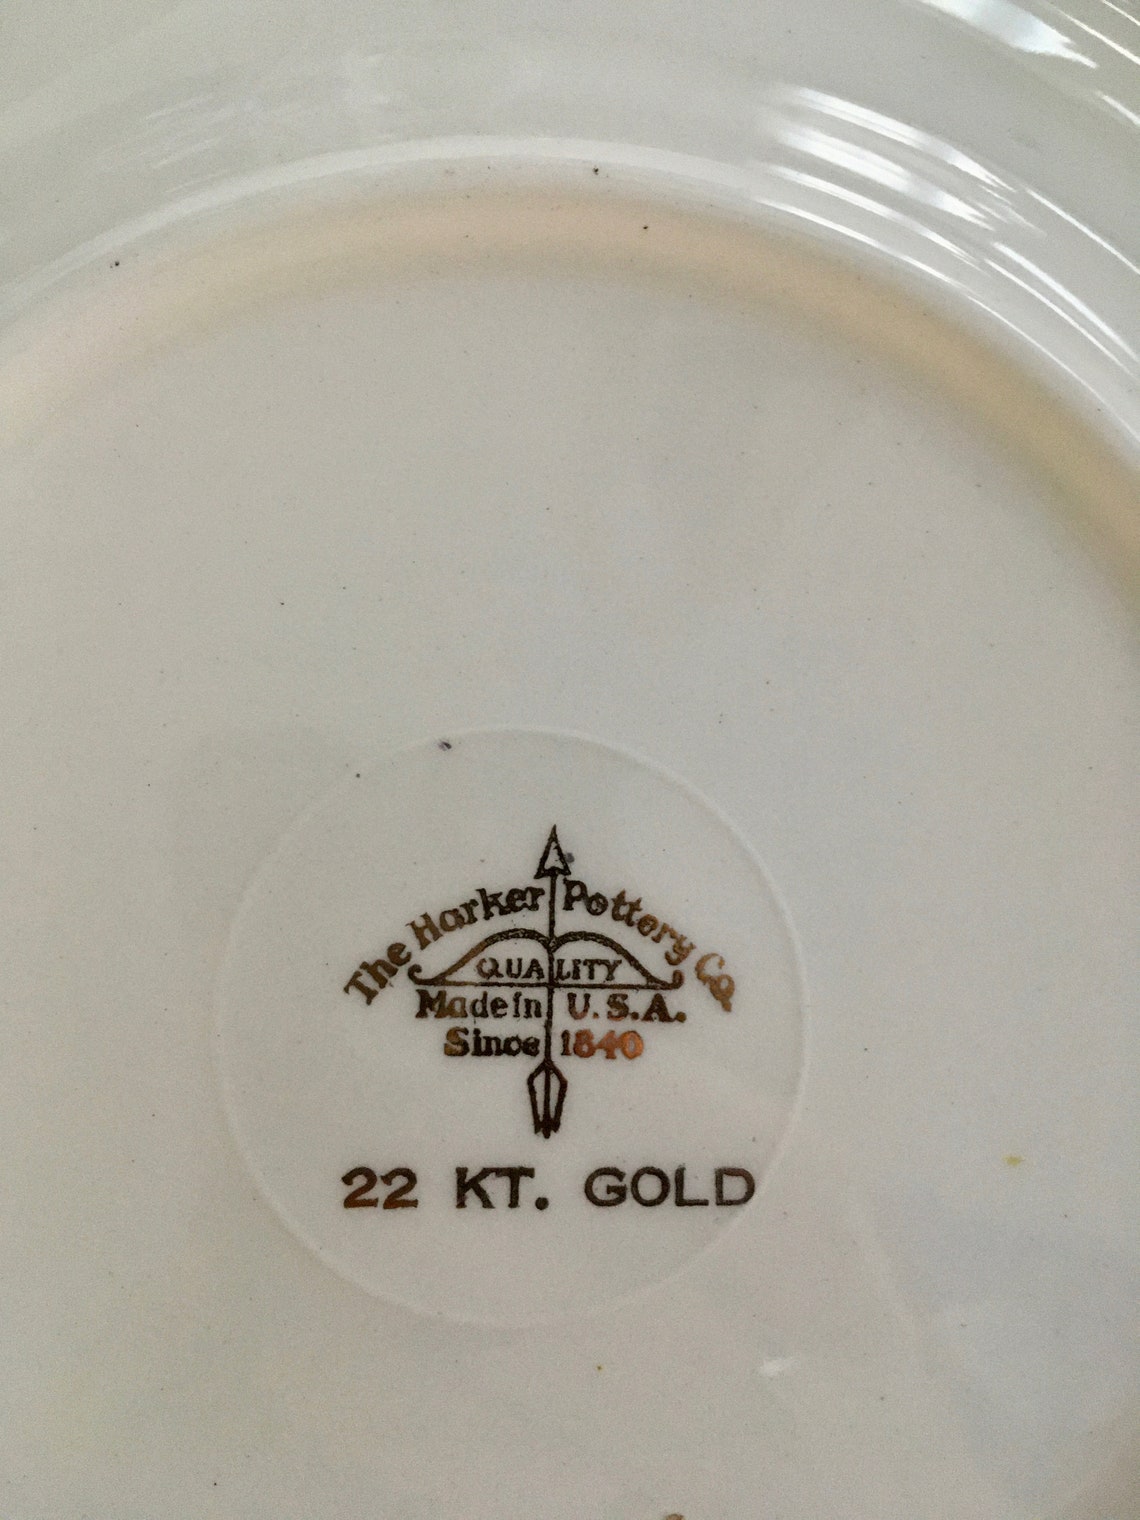 The Harker Pottery Co. 22 Kt. Gold Cake Plate Small Dessert - Etsy